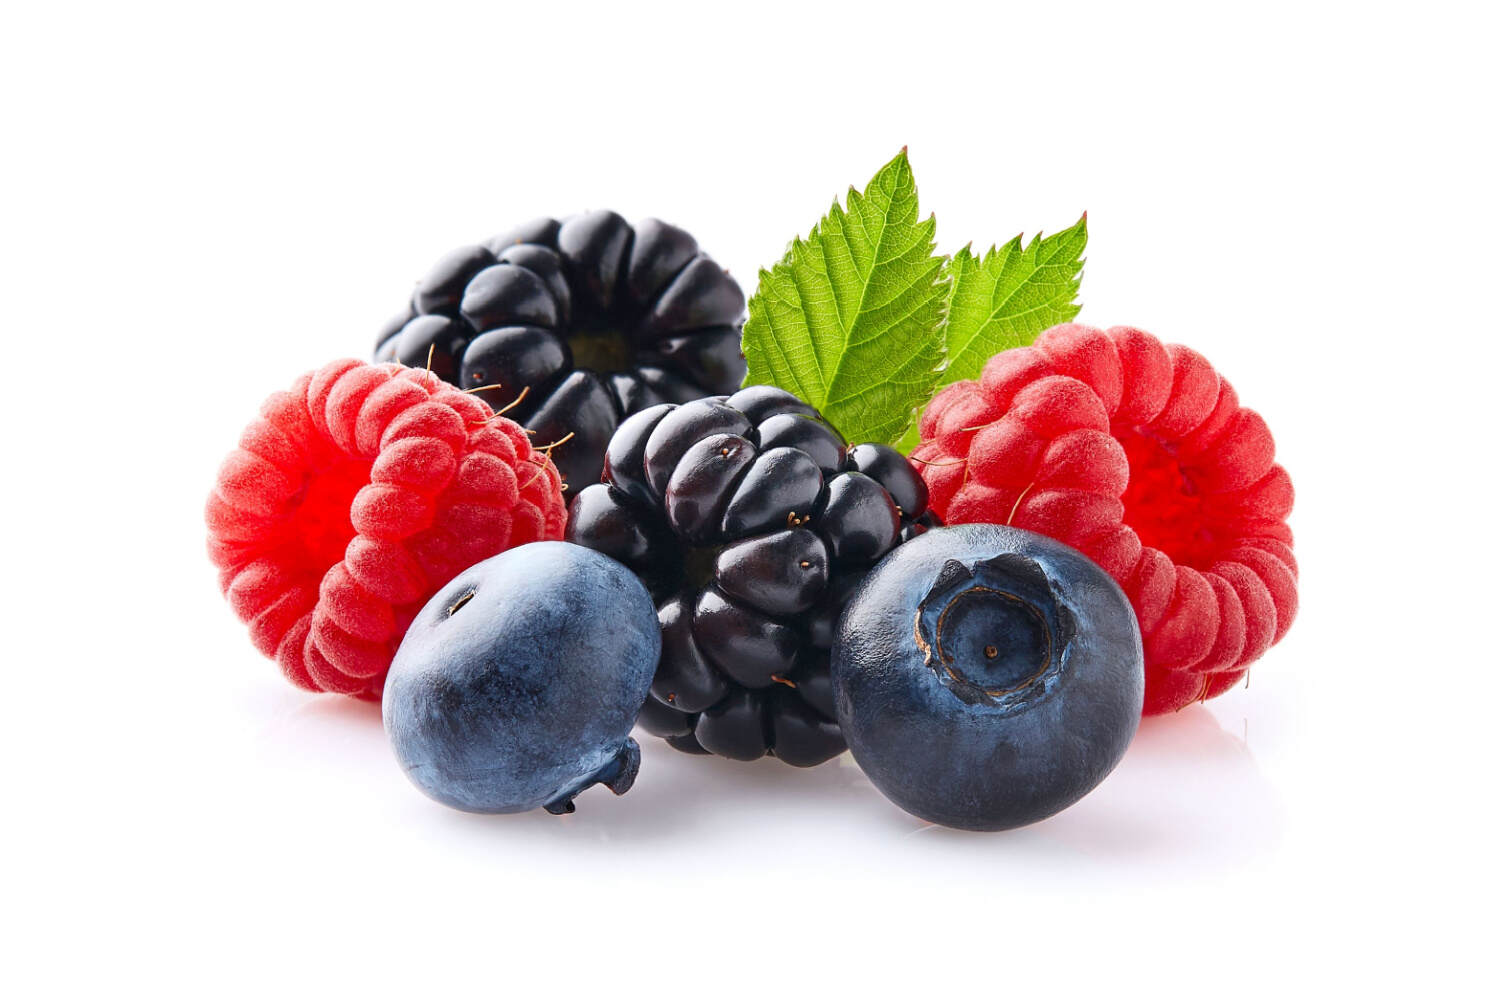 Berries are another brain boosting food for toddlers